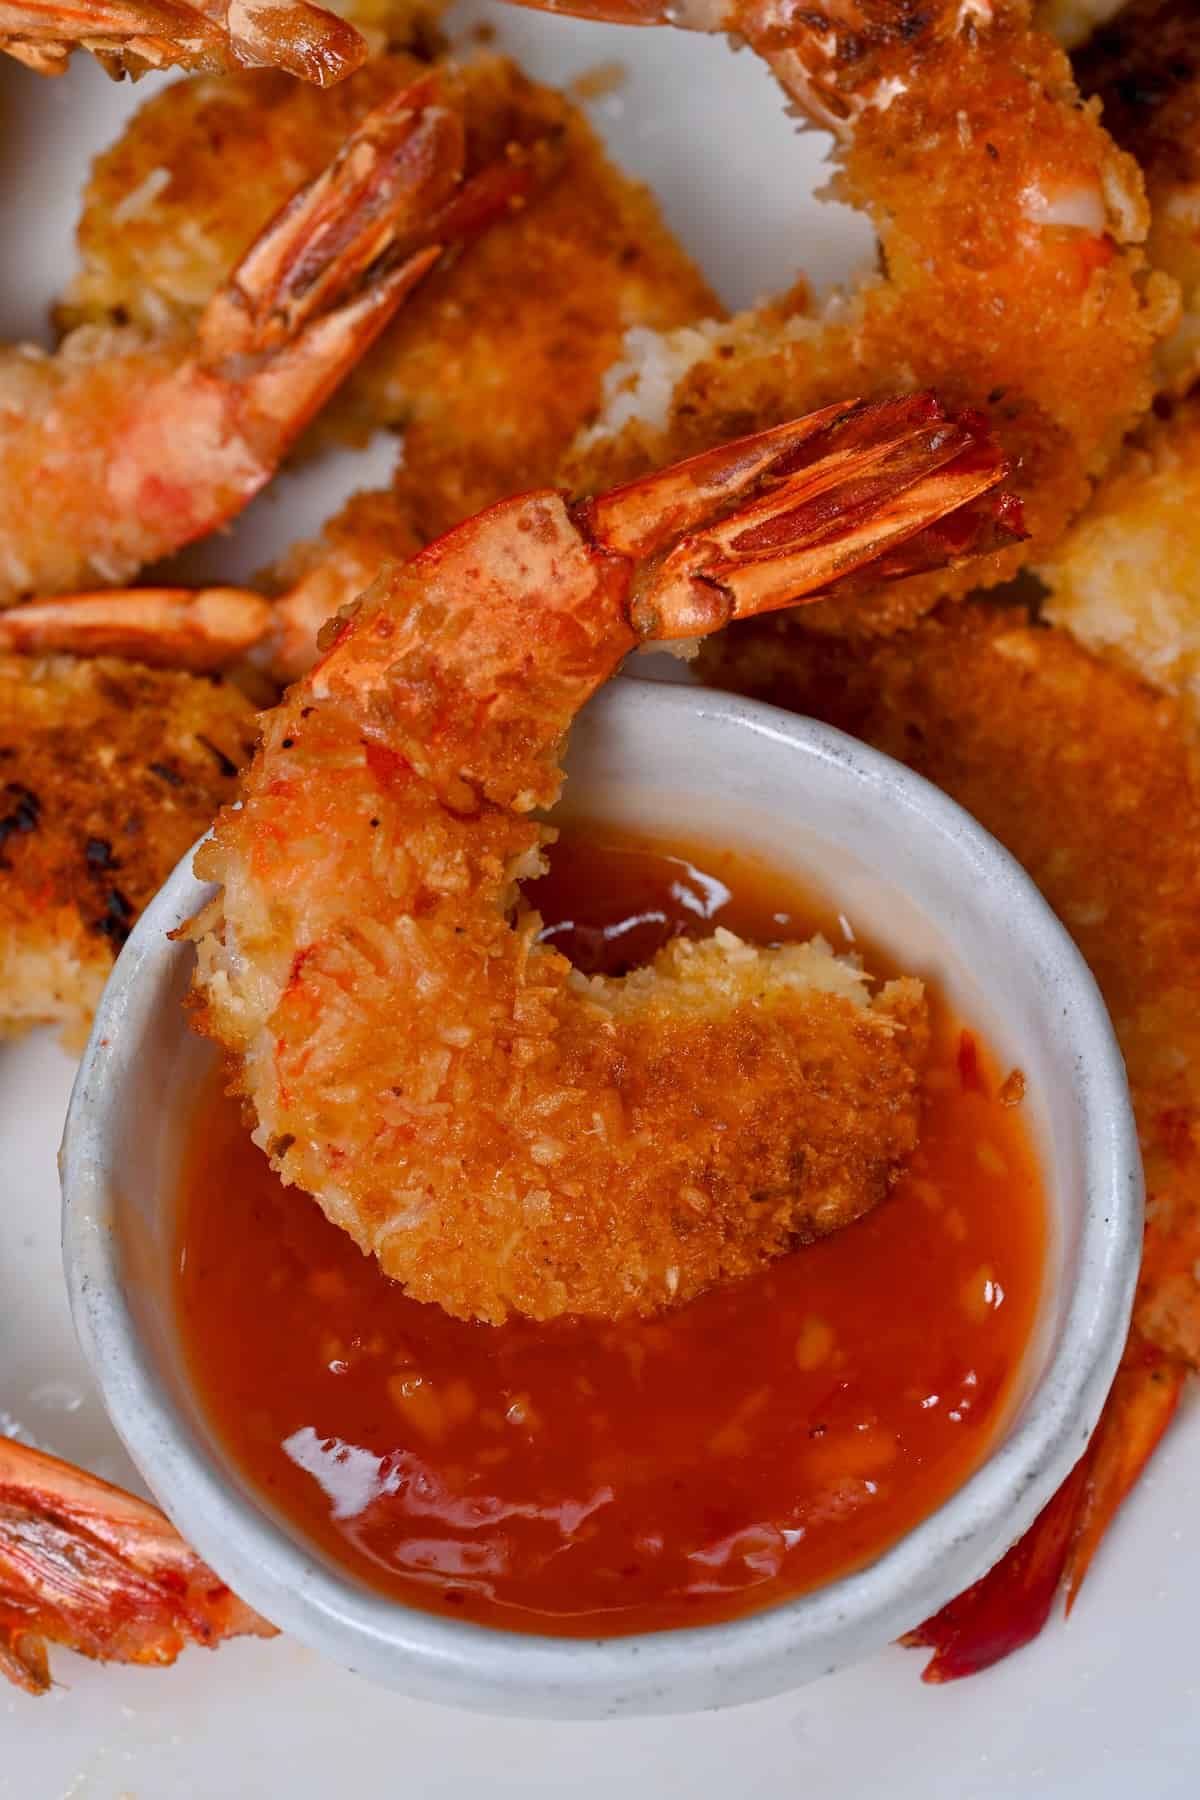 Dipping one fried shrimp in red sauce